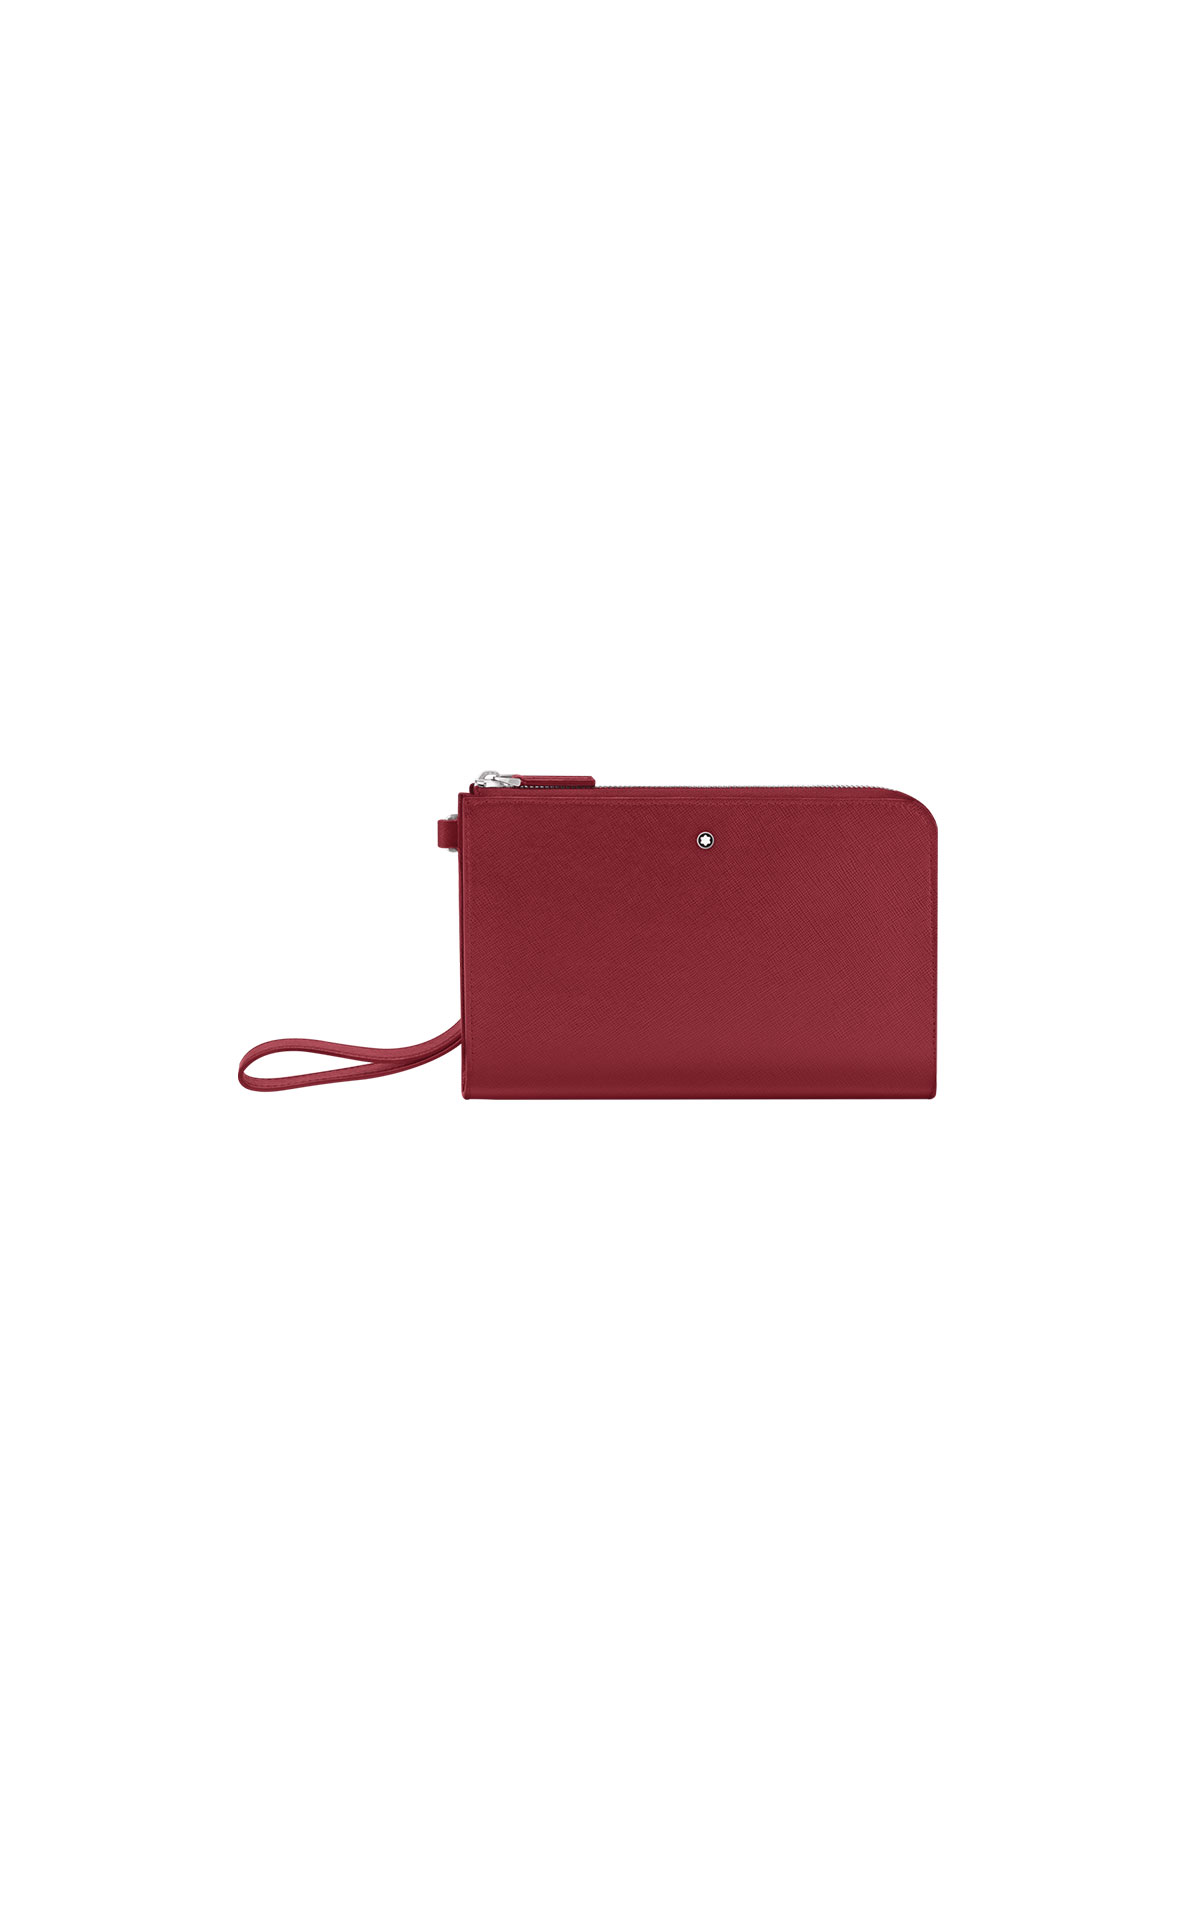 Montblanc Sartorial pouch small red from Bicester Village